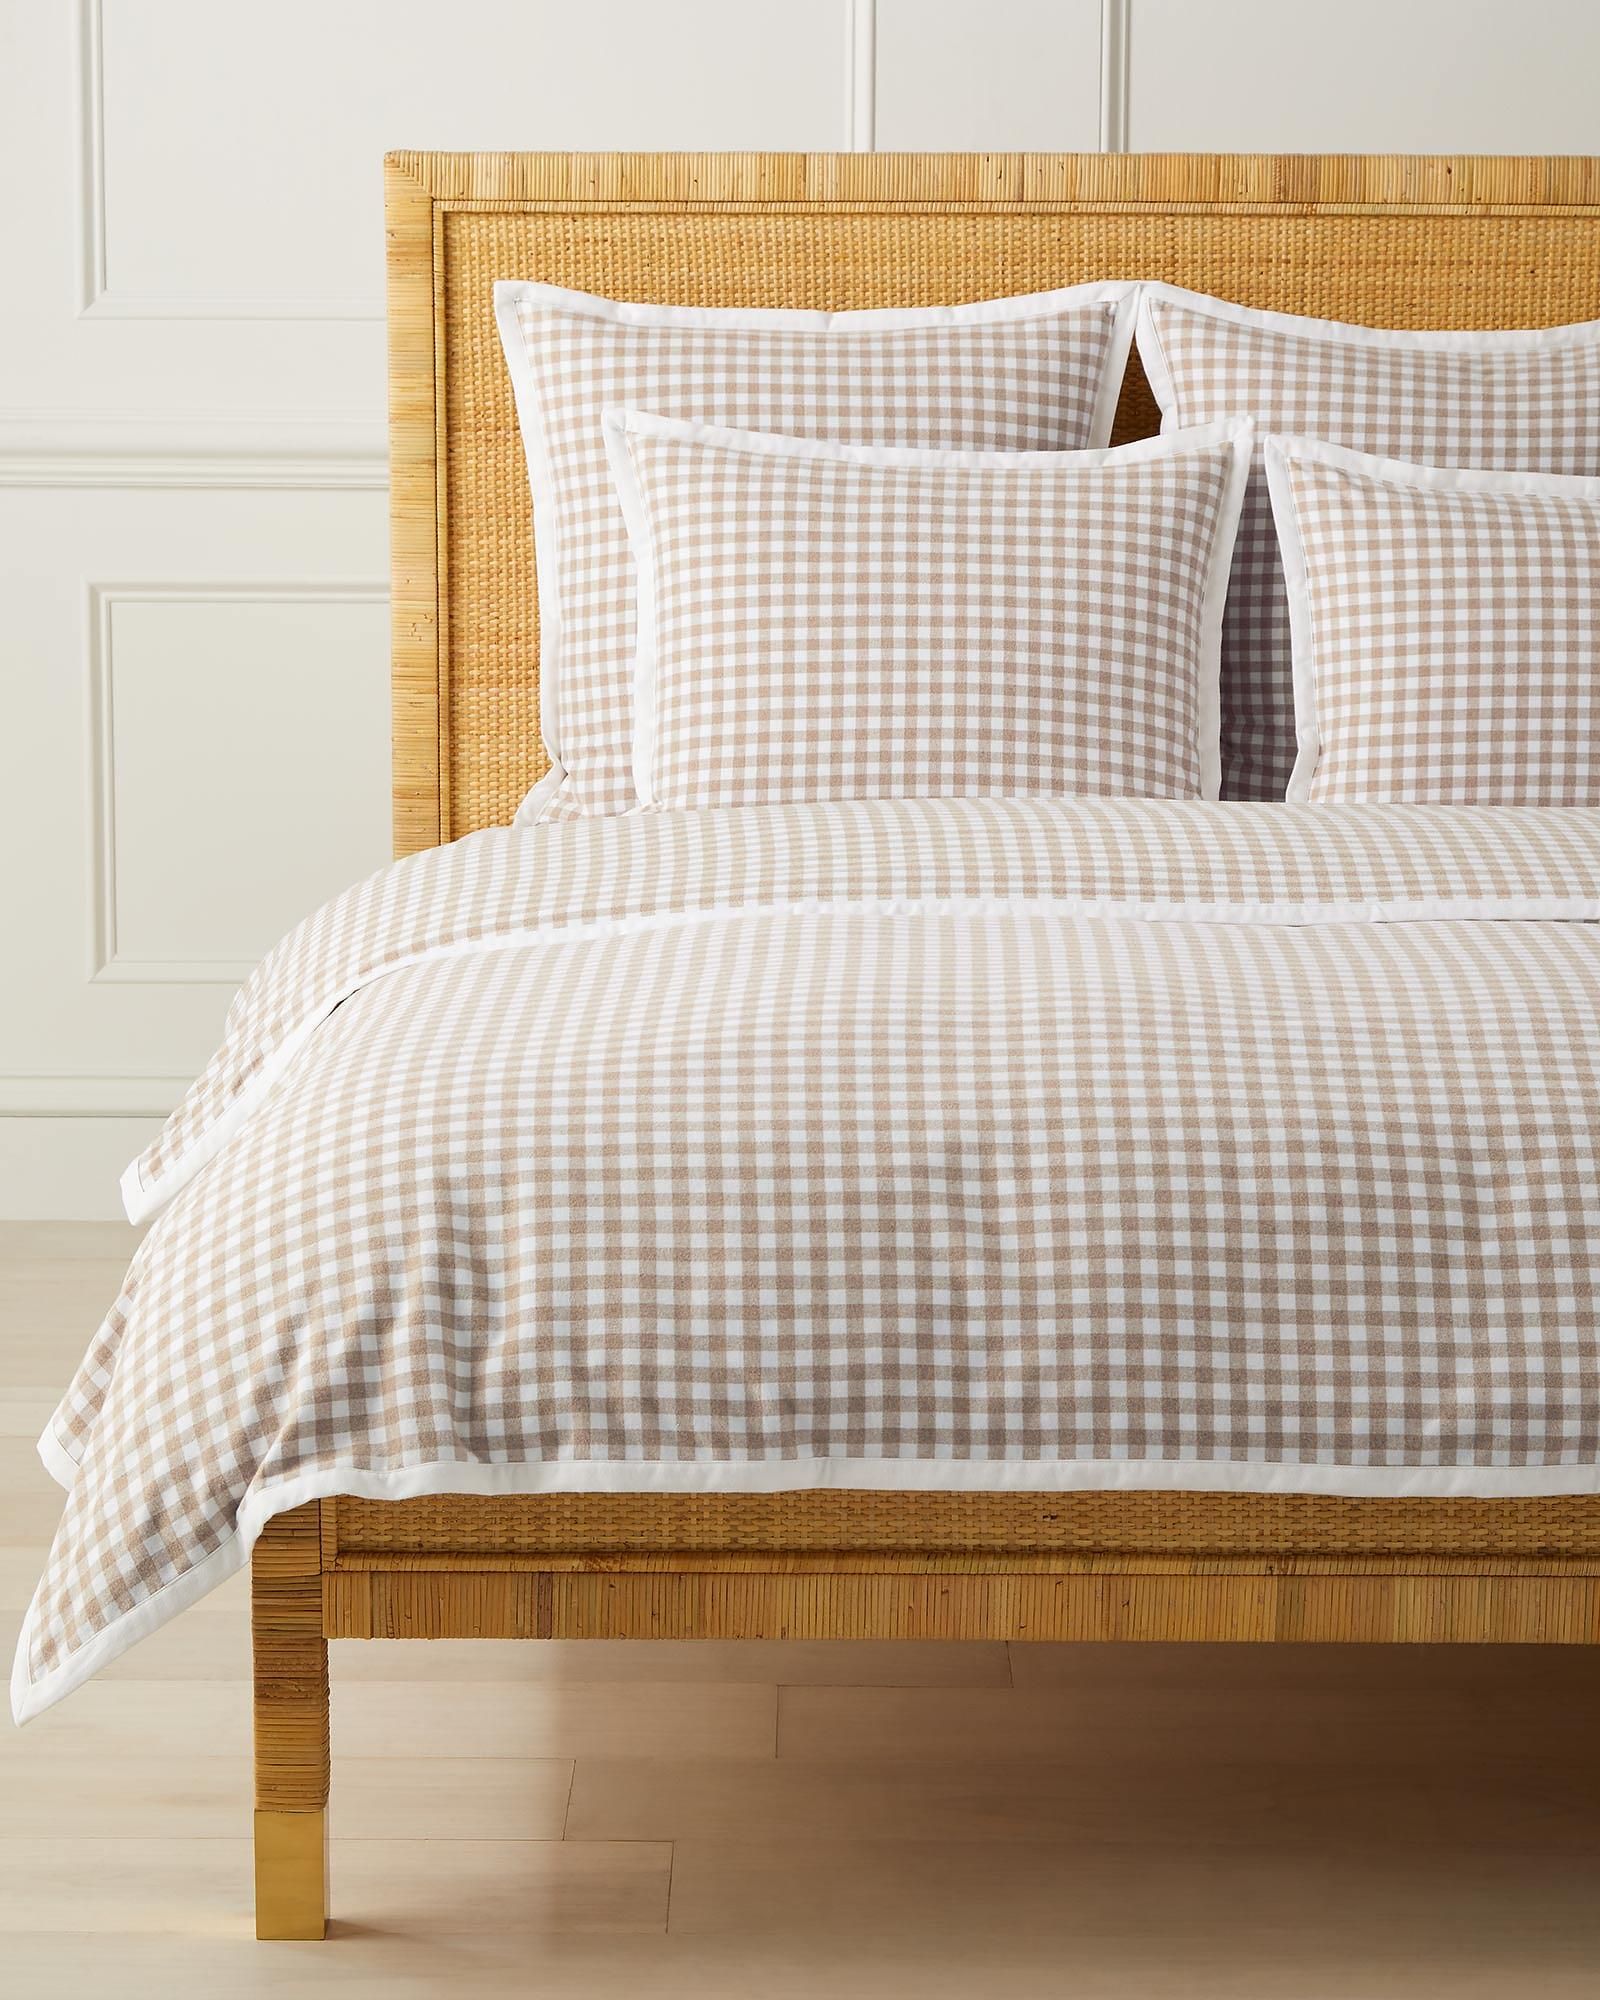 Belvedere  Flannel Duvet Cover | Serena and Lily